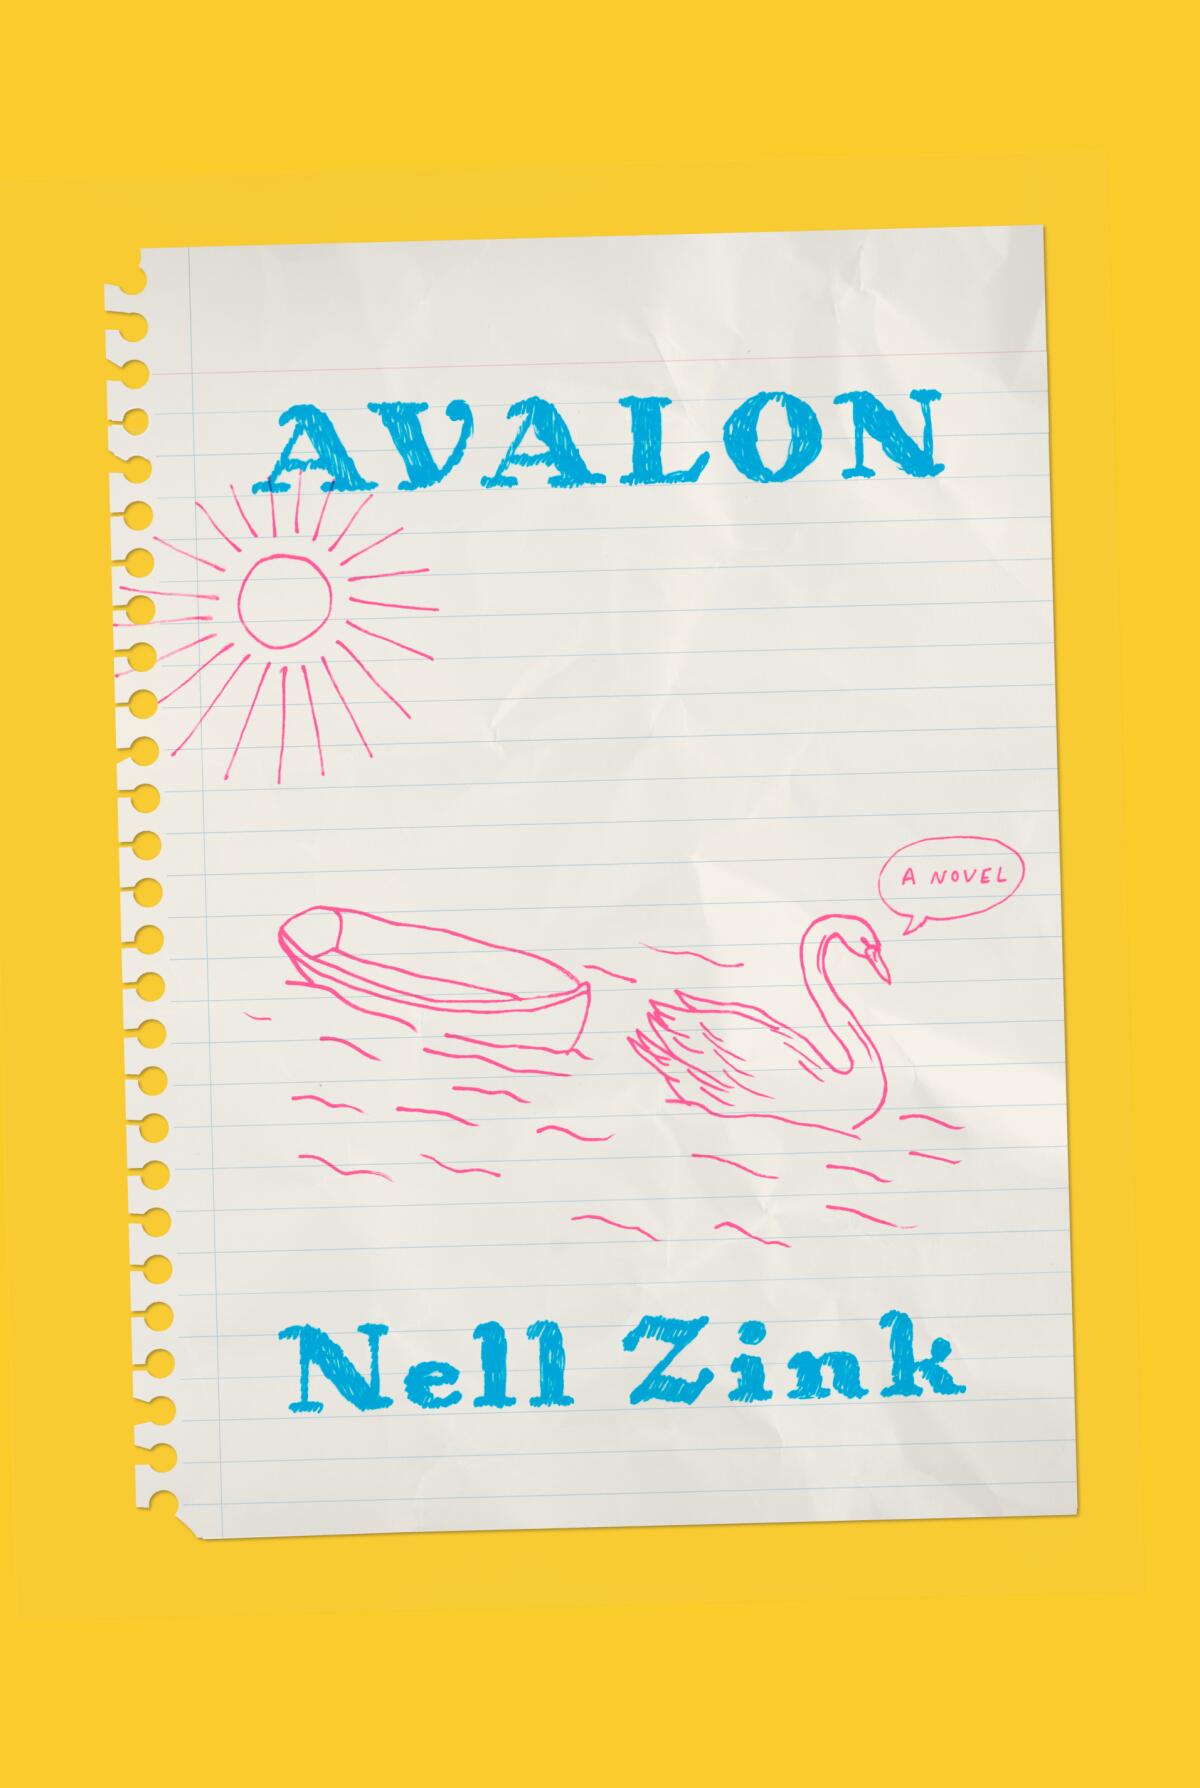 "Avalon," by Nell Zink